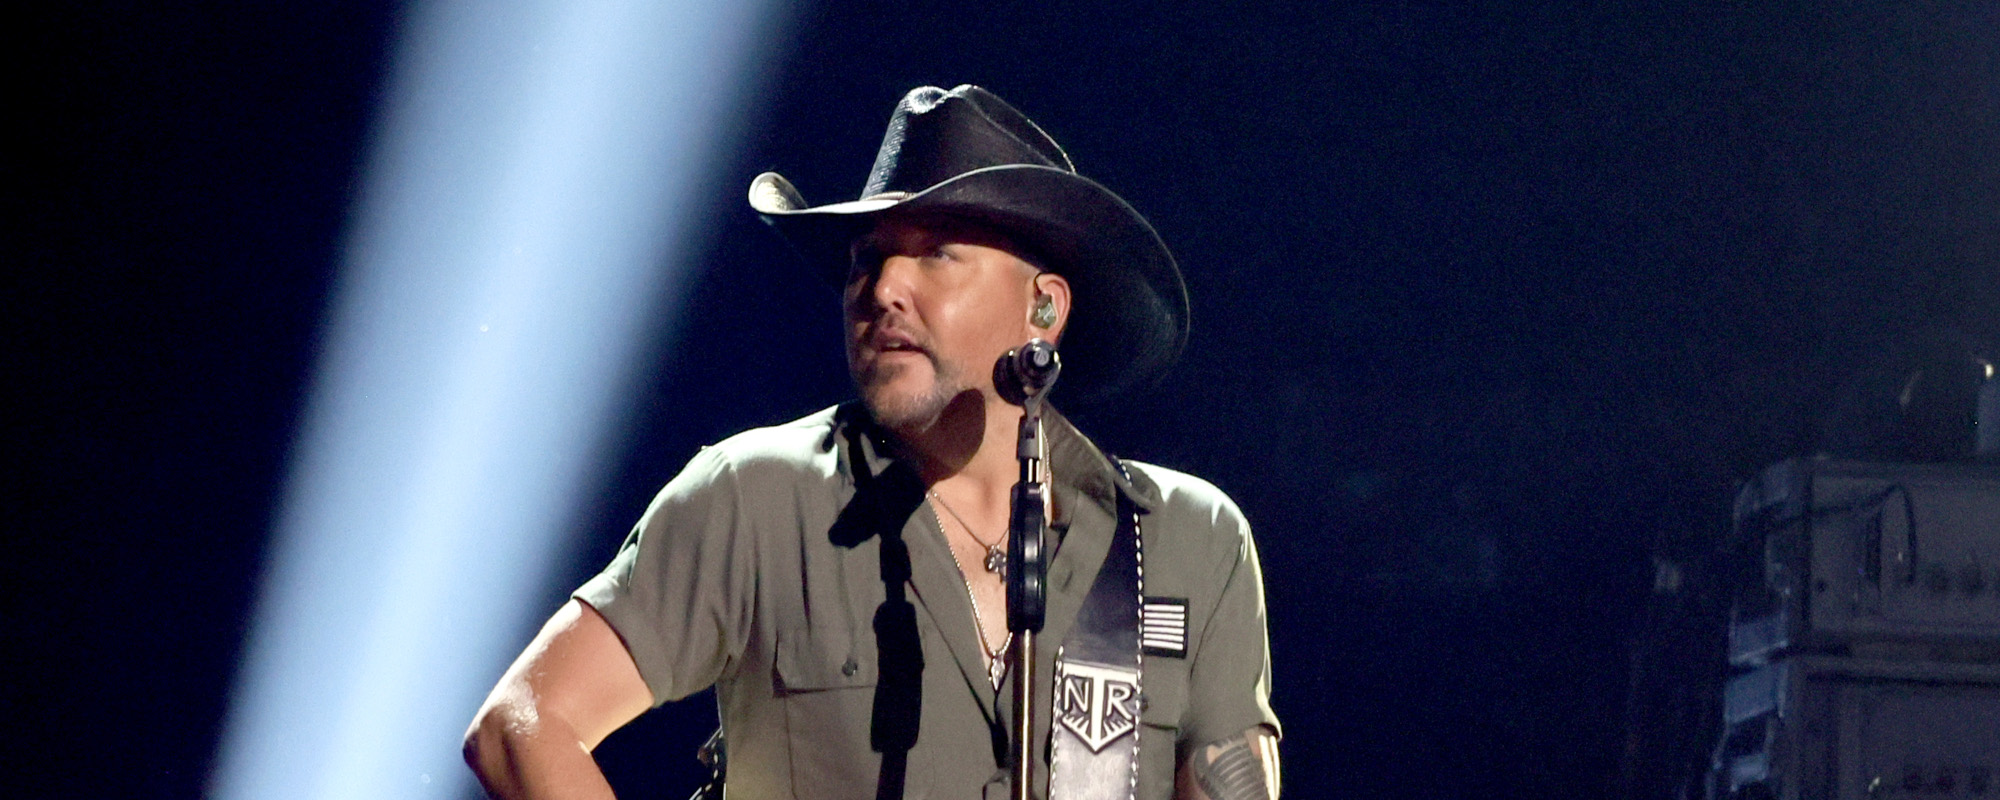 The Meaning Behind Jason Aldean’s Controversial Hit “Try That in a Small Town”